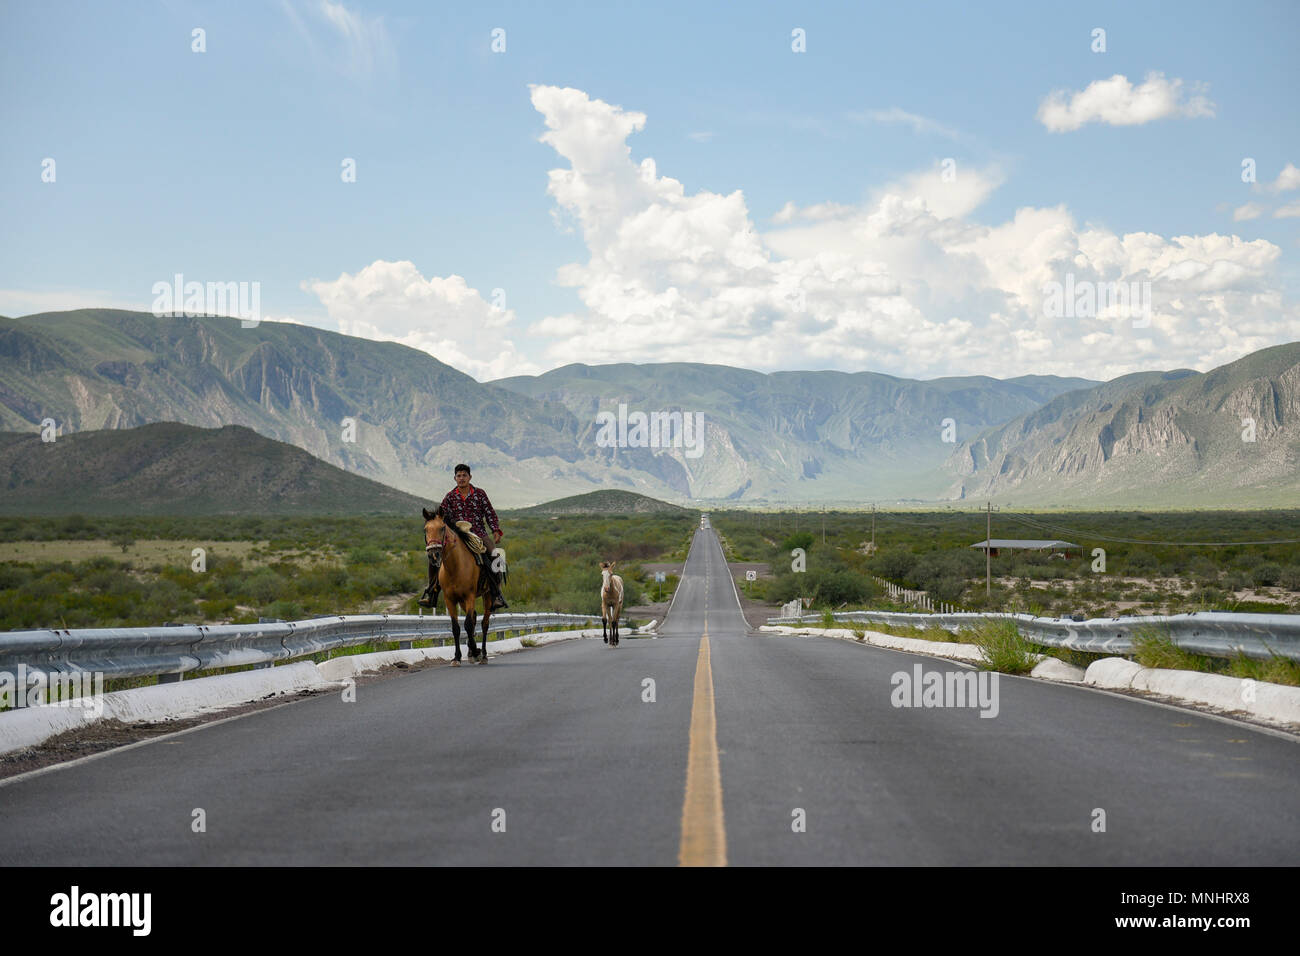 Front view of man riding horse along road with mountains in background, Durango, Mexico Stock Photo